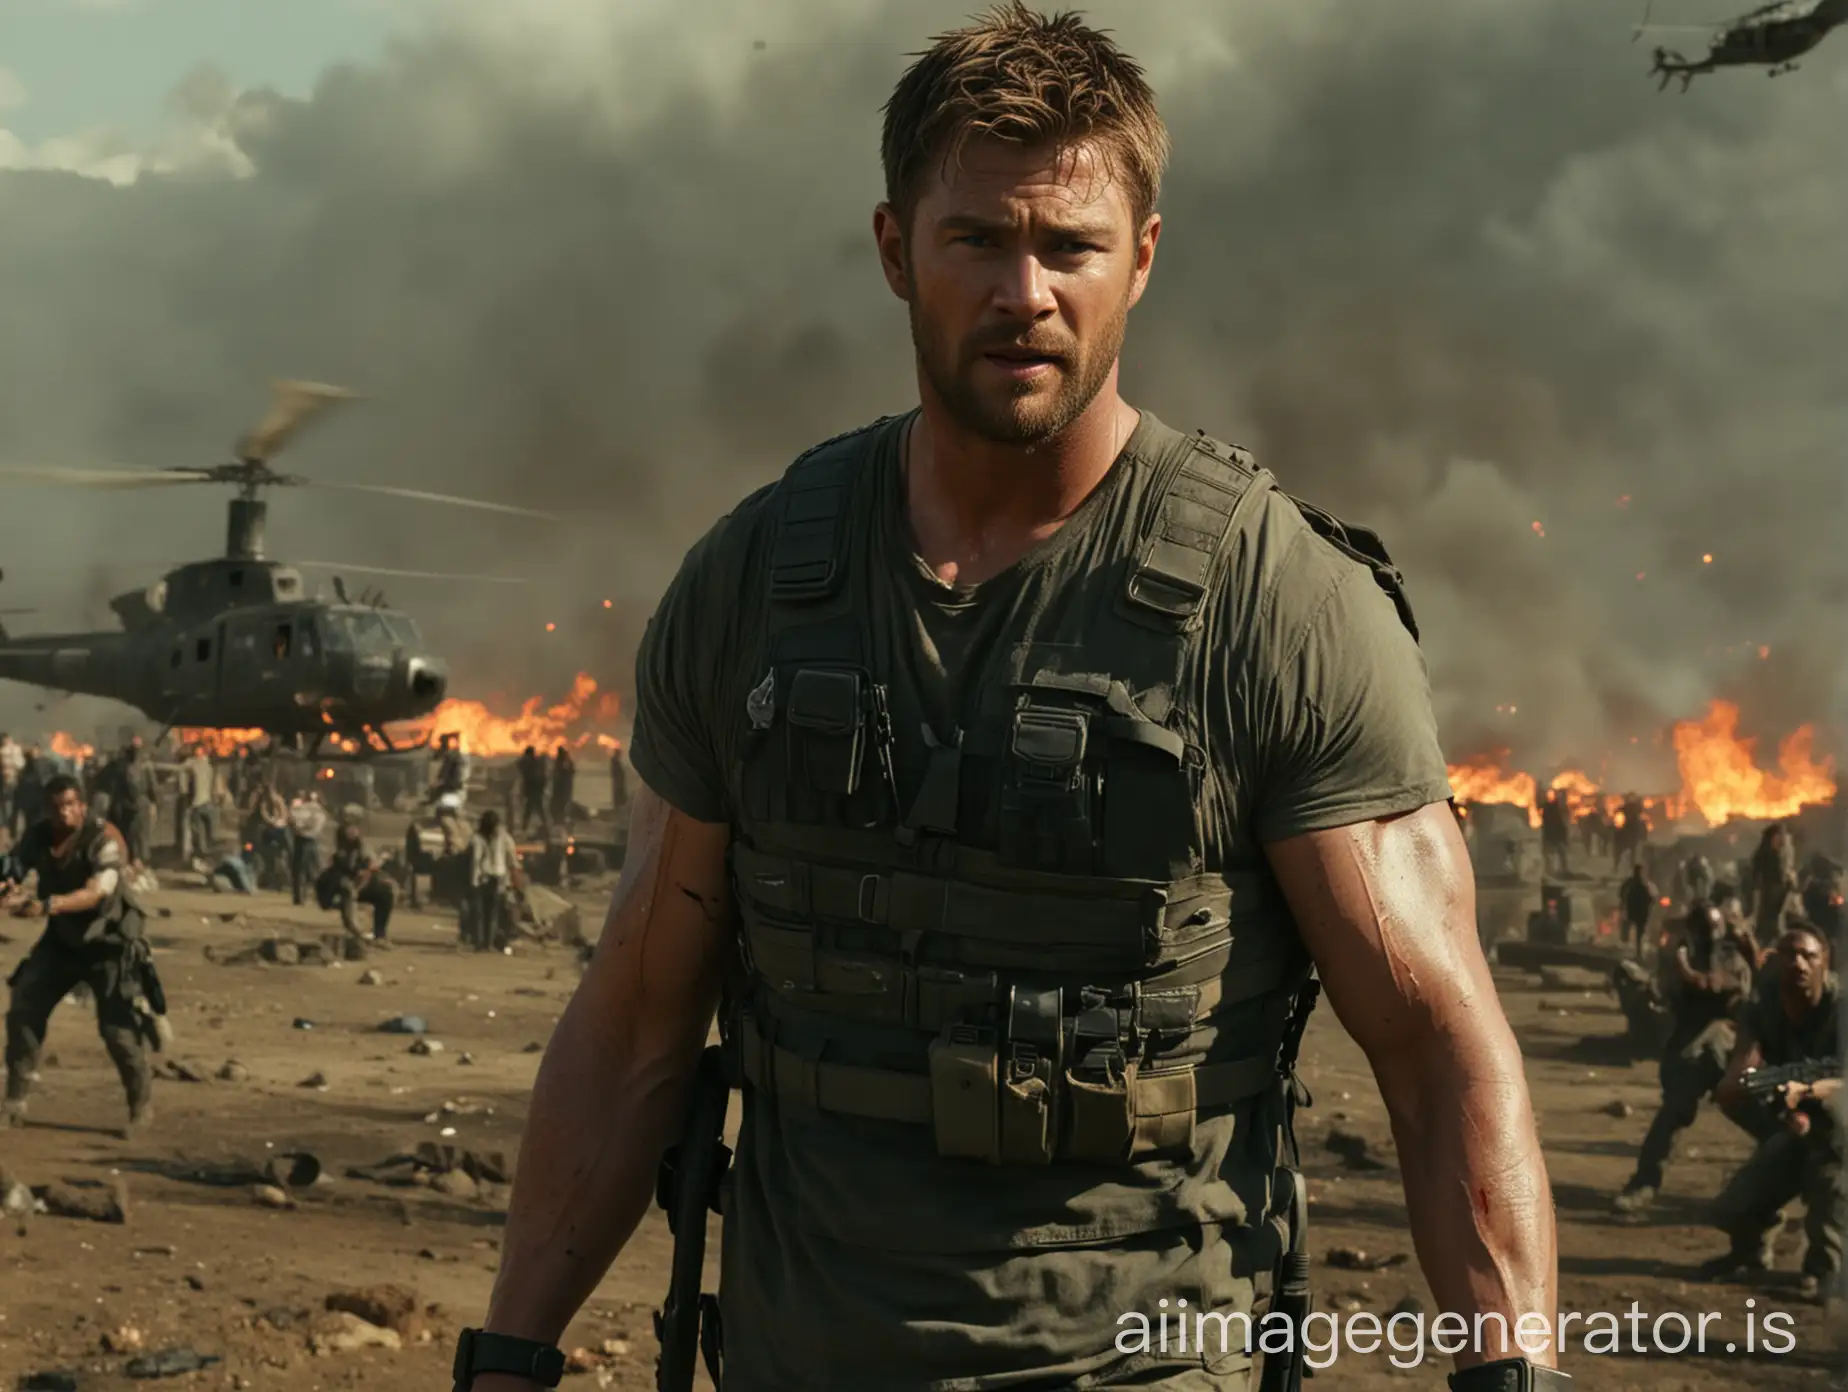 Extraction 3 - First Trailer, wounded and stunning army look of Chris Hemsworth, holding gun in hand, fire in background, helipad in sky, zombie war